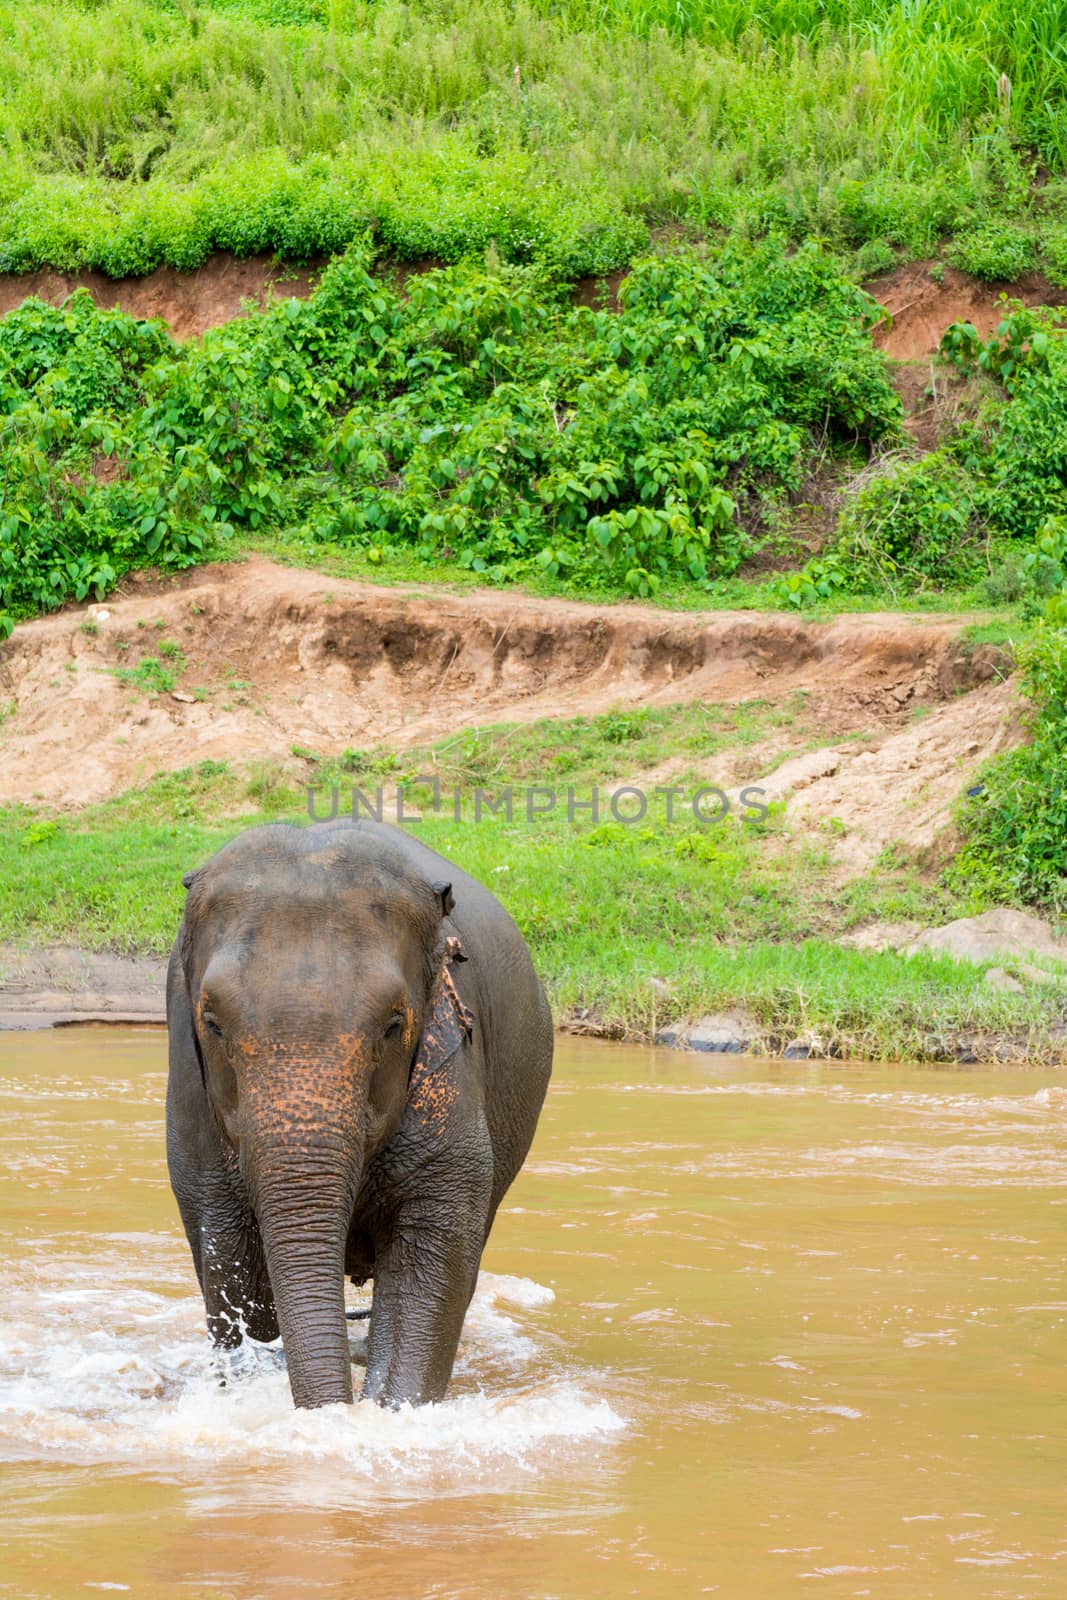 Elephant in protected nature park near Chiang Mai, Thailand